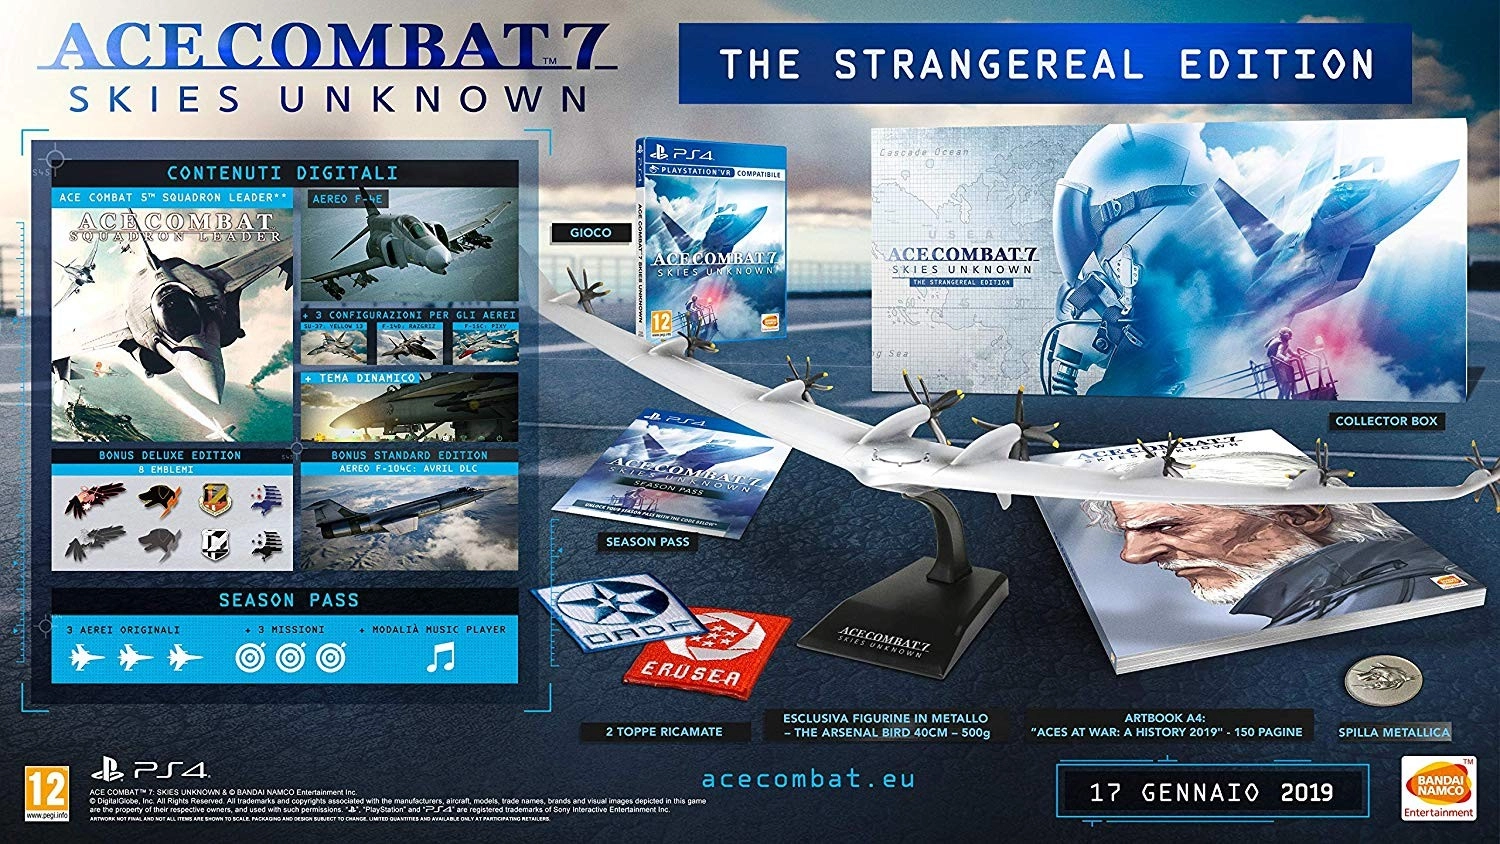 Ace Combat 7: Skies Unknown Strangereal Edition (Xbox One)